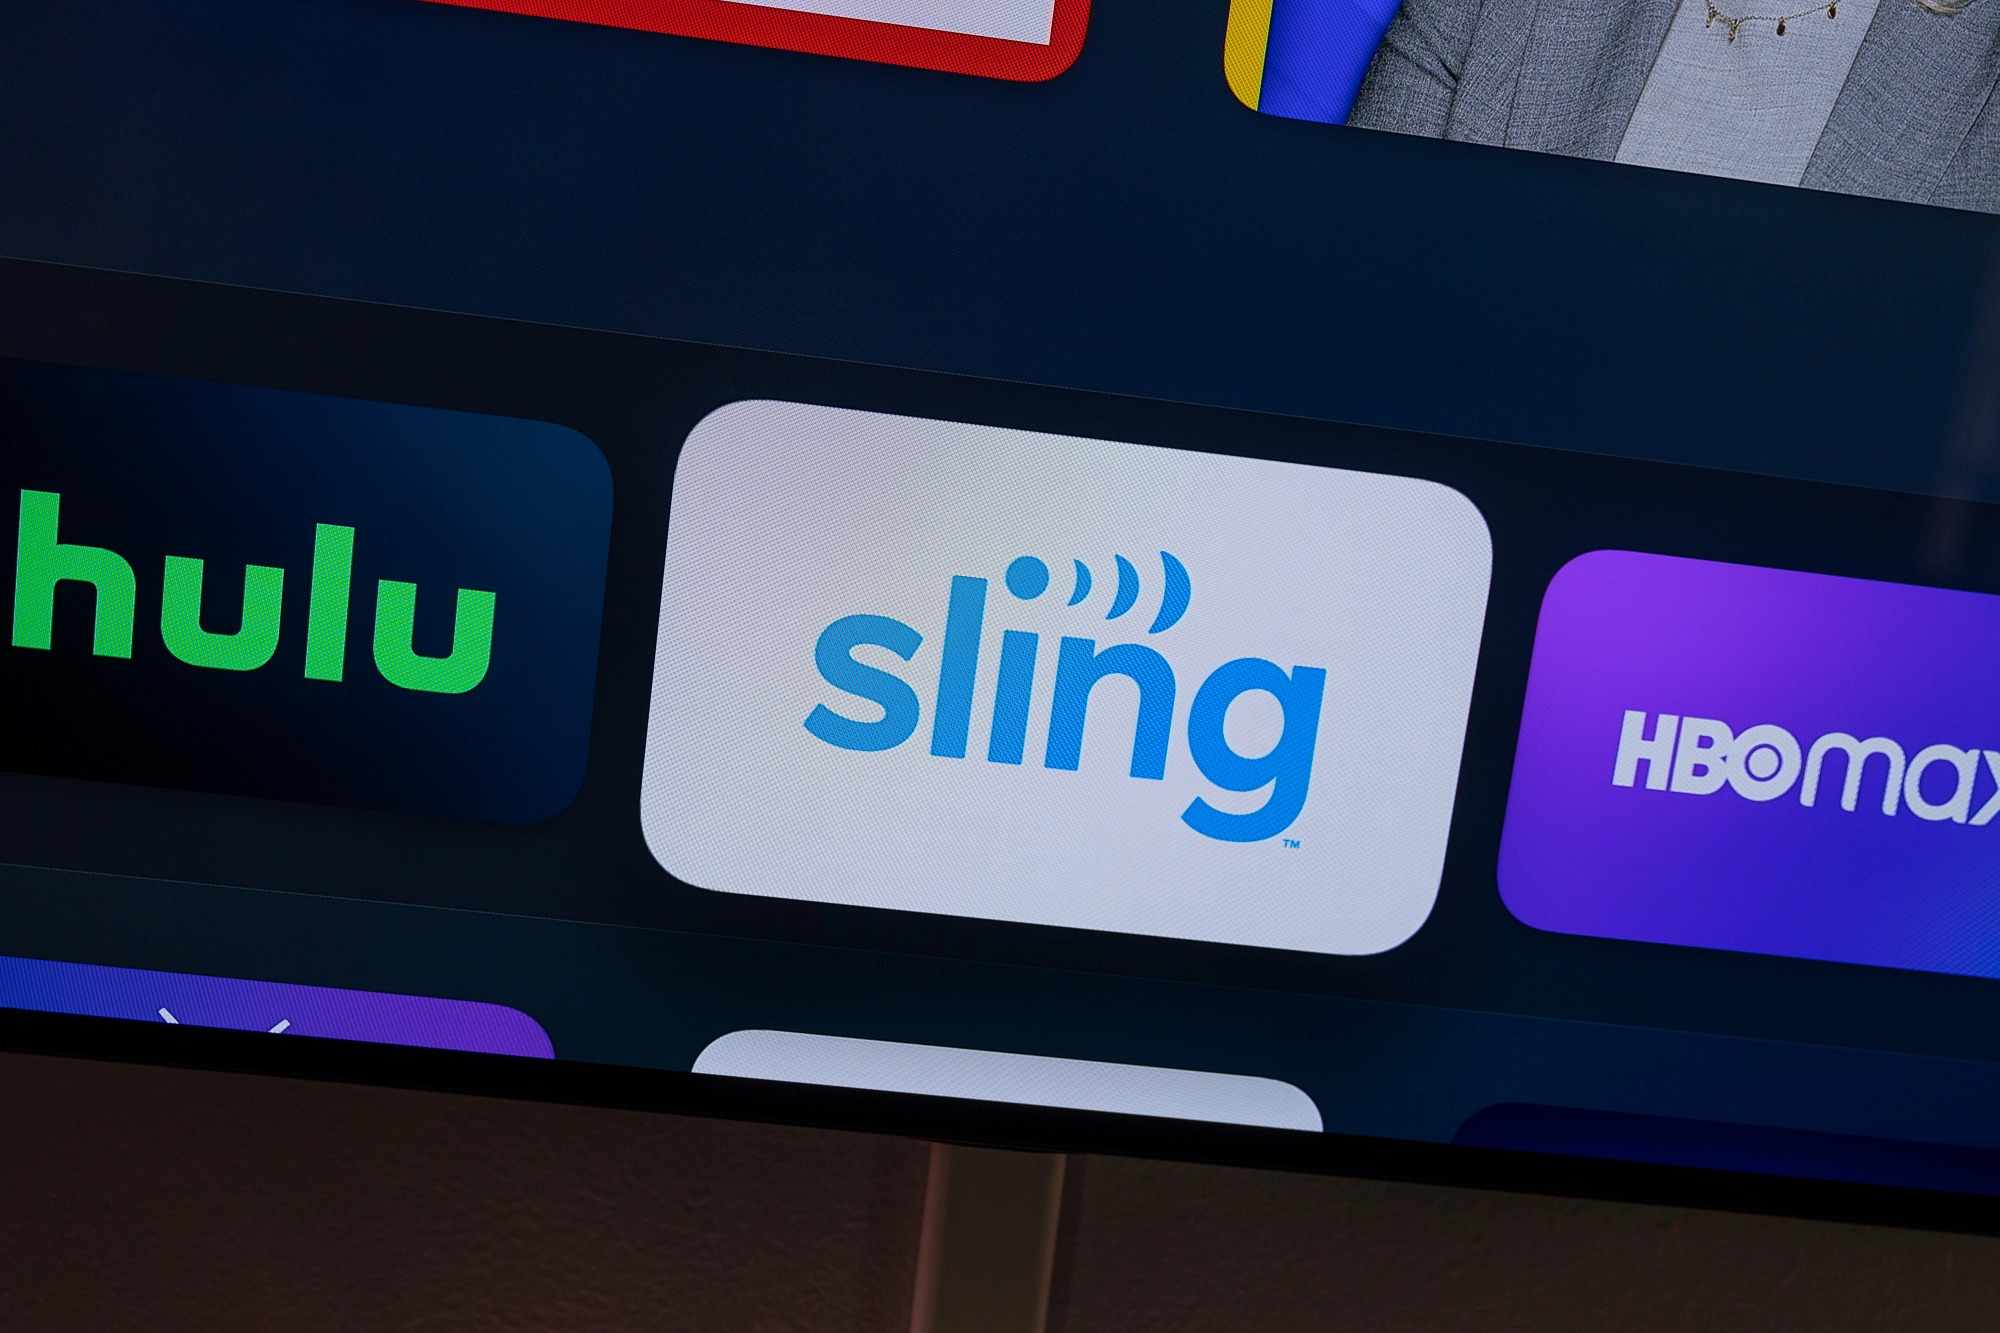 hulu-vs-sling-which-live-tv-service-is-best